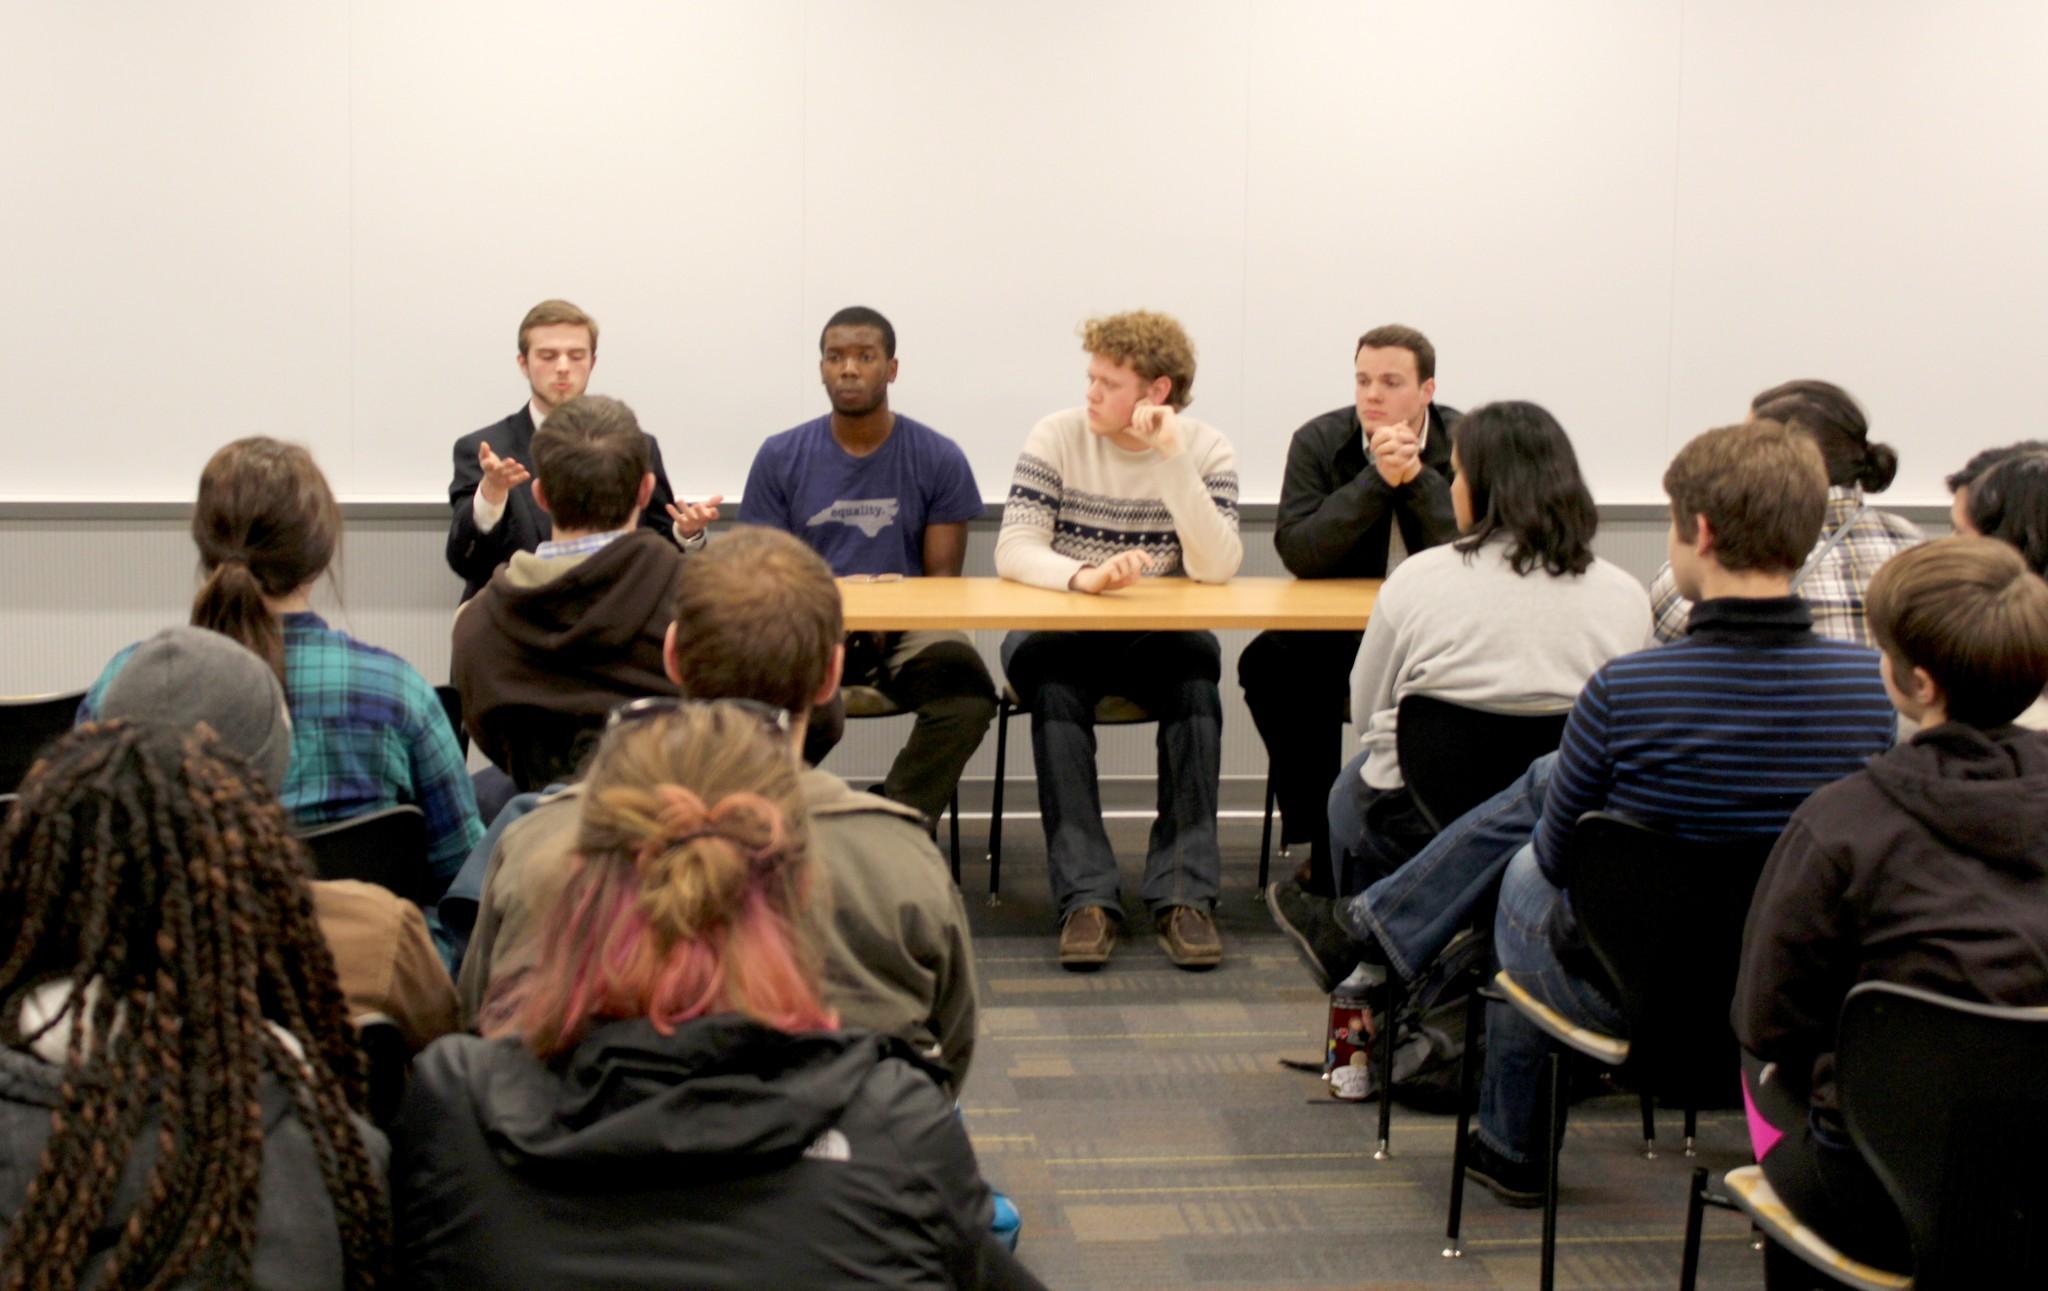 Sam Murray, Chukwuebuka Ibeziako, Patrick Long, and Carson Rich answer questions posed by the Women's Center and audience members regarding sexual assault.